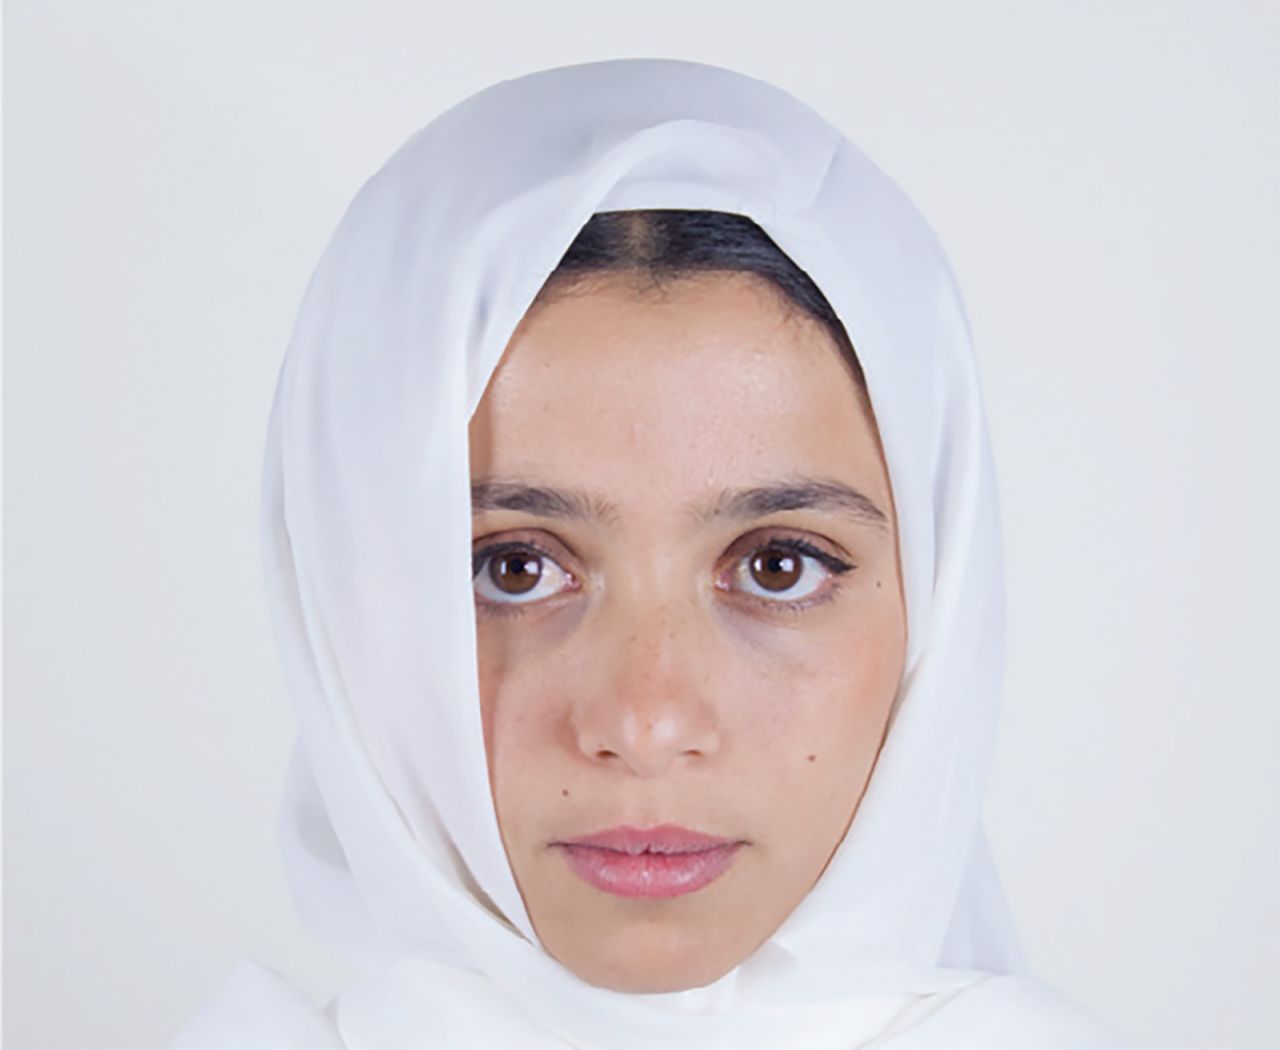 "Passport Don'ts" (2017) by Nadia Gohar. Gohar created a series of "flawed" passport photos to questions notions of prejudice when it comes to self-presentation.